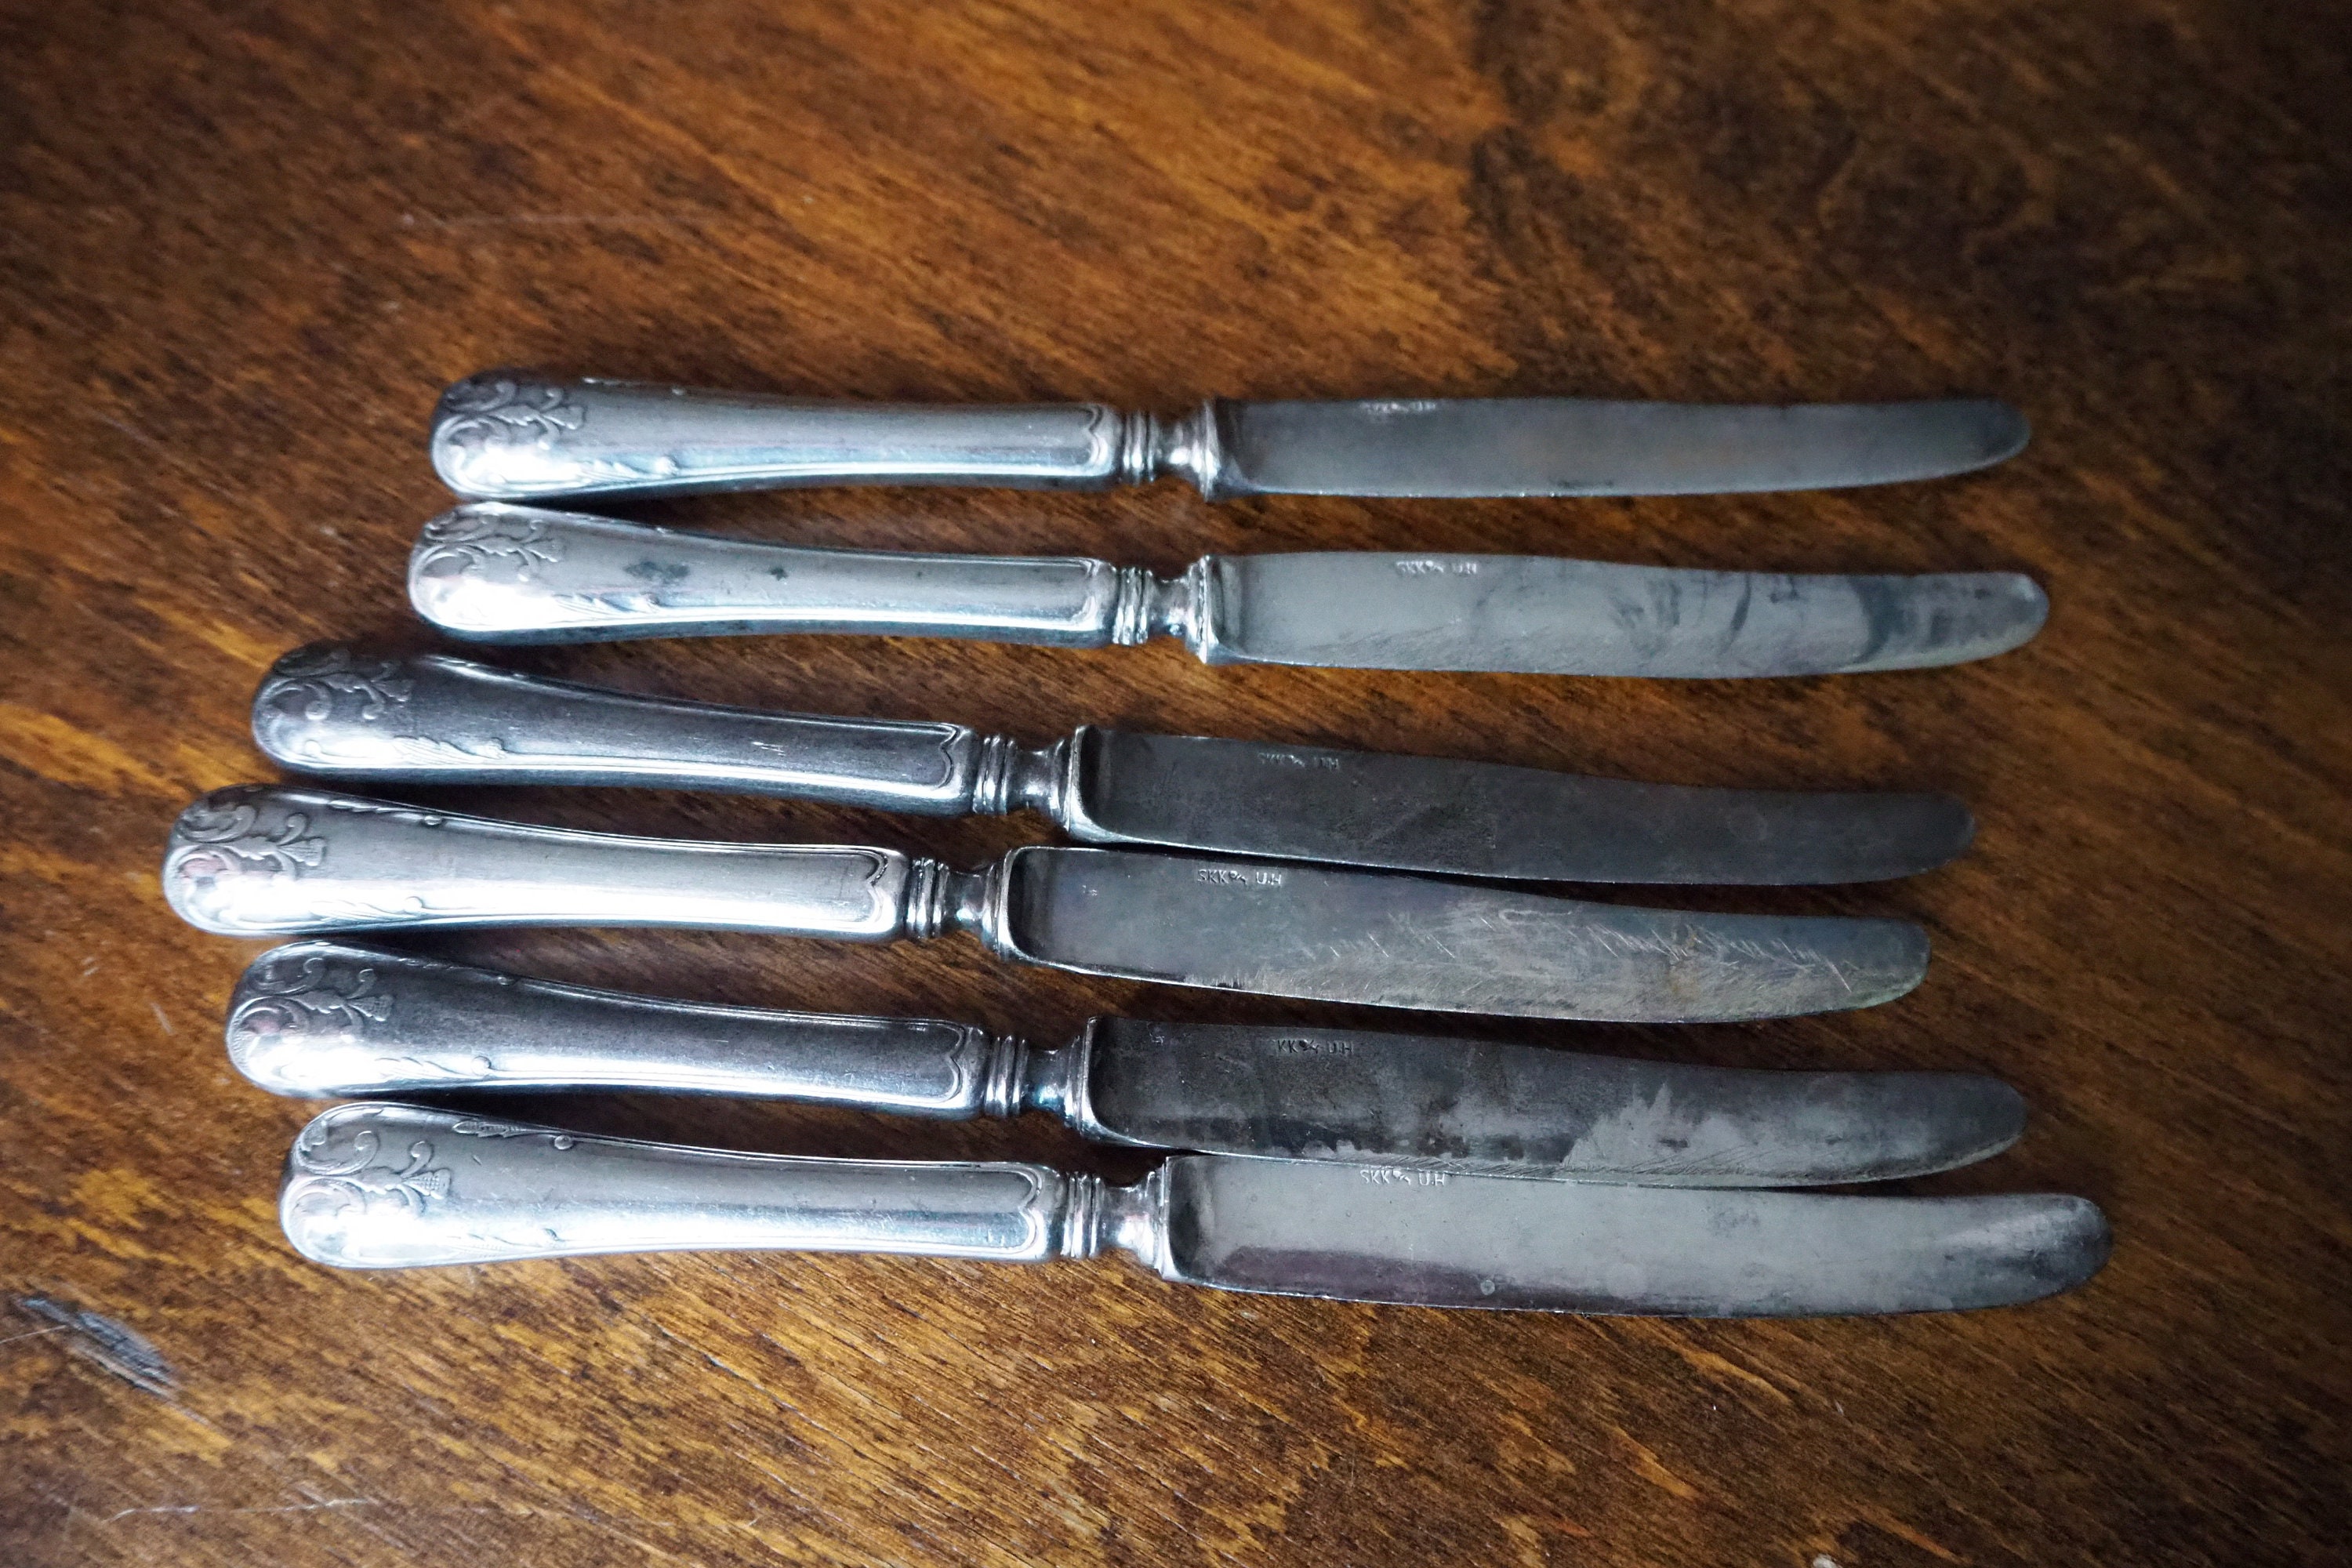 Set of Six Vintage Knives Alpacca Silver Knives Vintage Alpacca Silver  Knives Vintage New Silver Knives Vintage Knife Set 